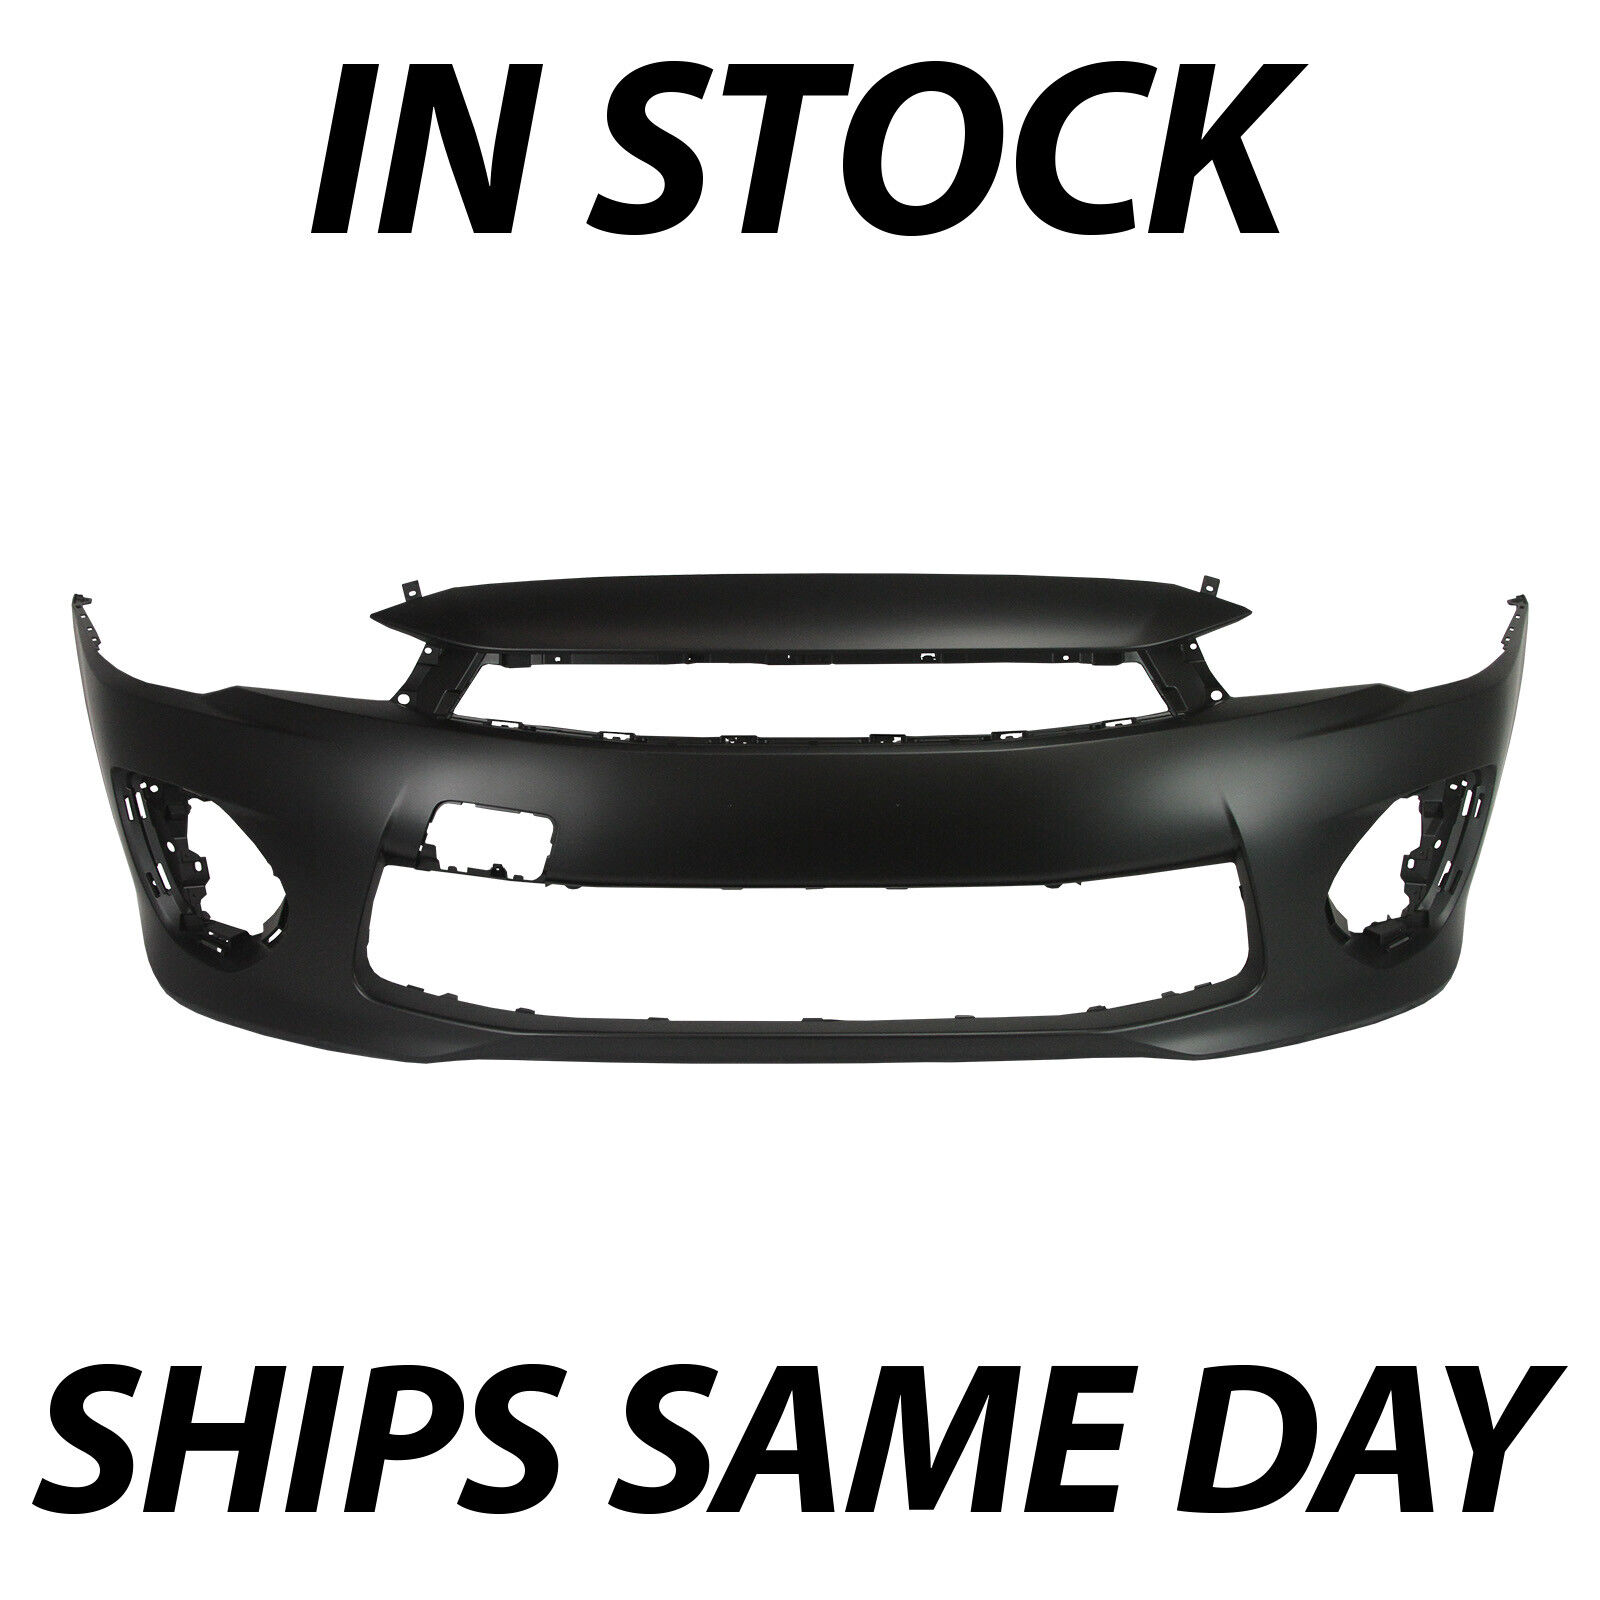 NEW Primered - Front Bumper Cover for 2016 2017 Mitsubishi Lancer w/ Tow Hook